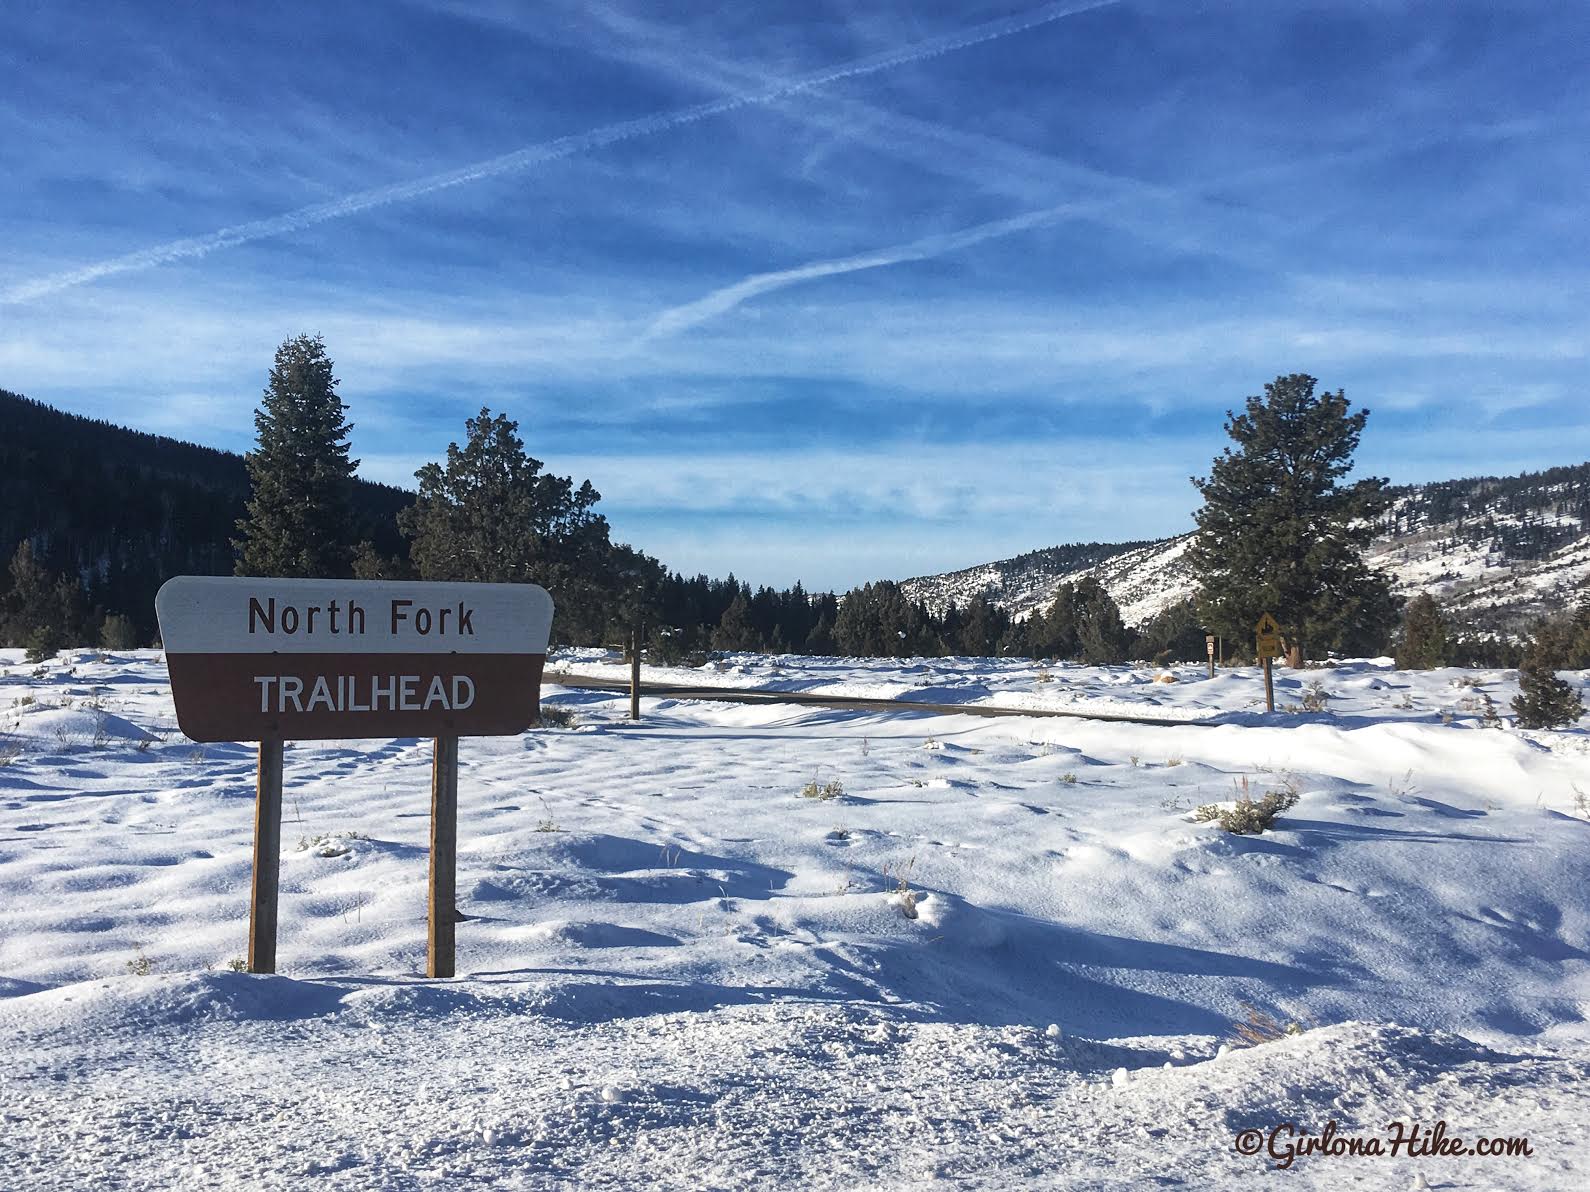 Cross Country Skiing in the Uintas, North Fork Provo XC Ski Trail